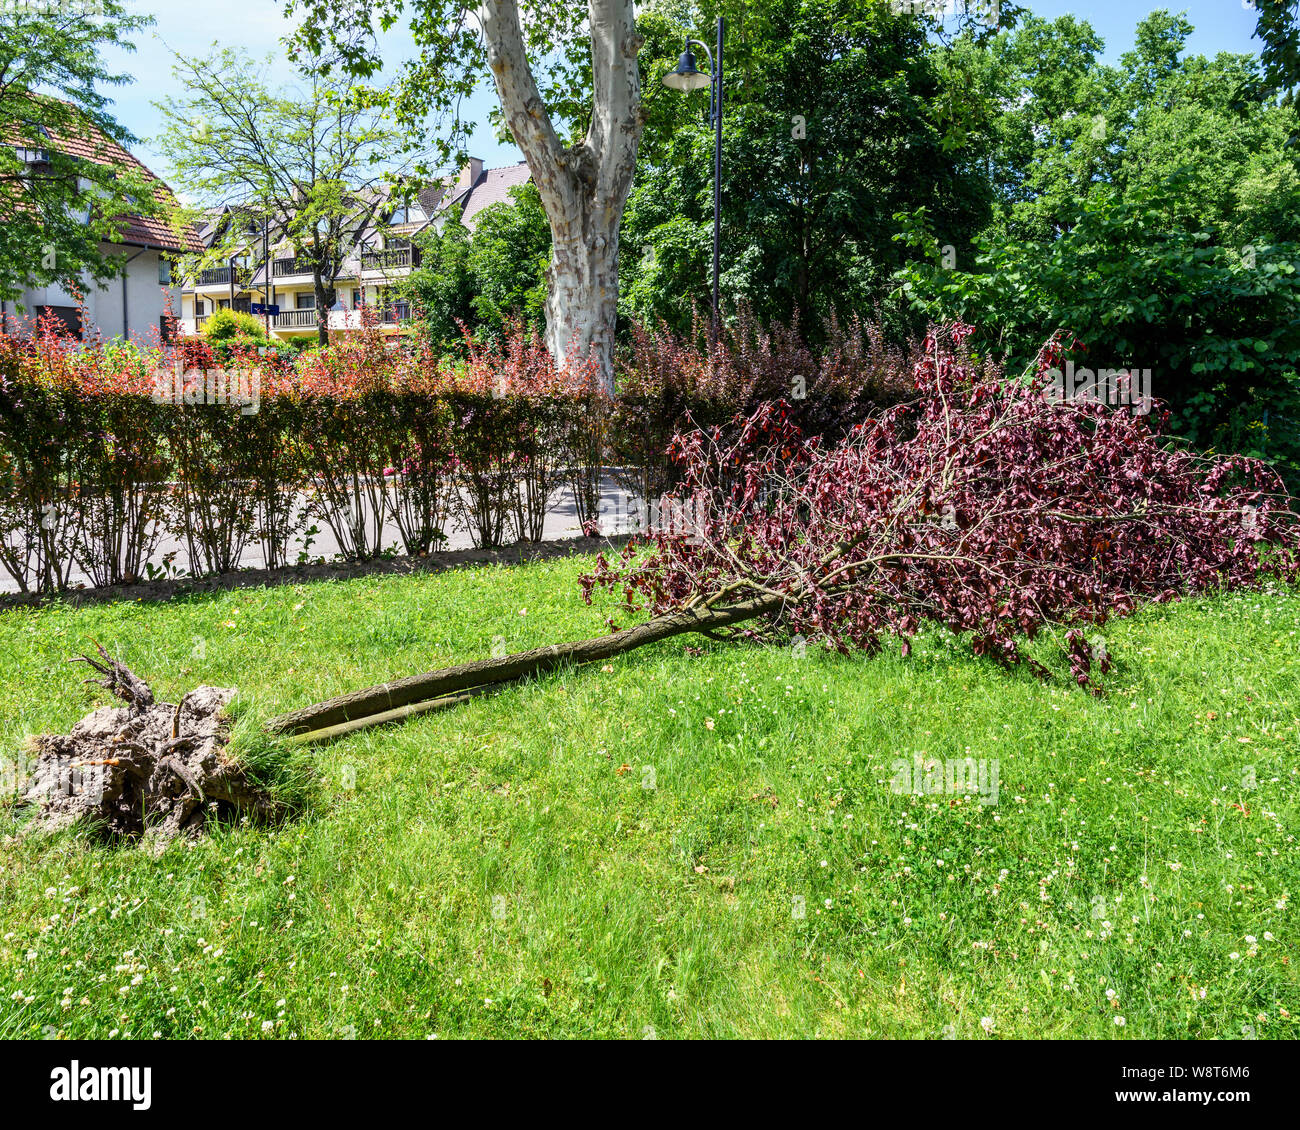 Uprooted Sargent's cherry tree after storm, June 2019, Alsace, France, Europe, Stock Photo